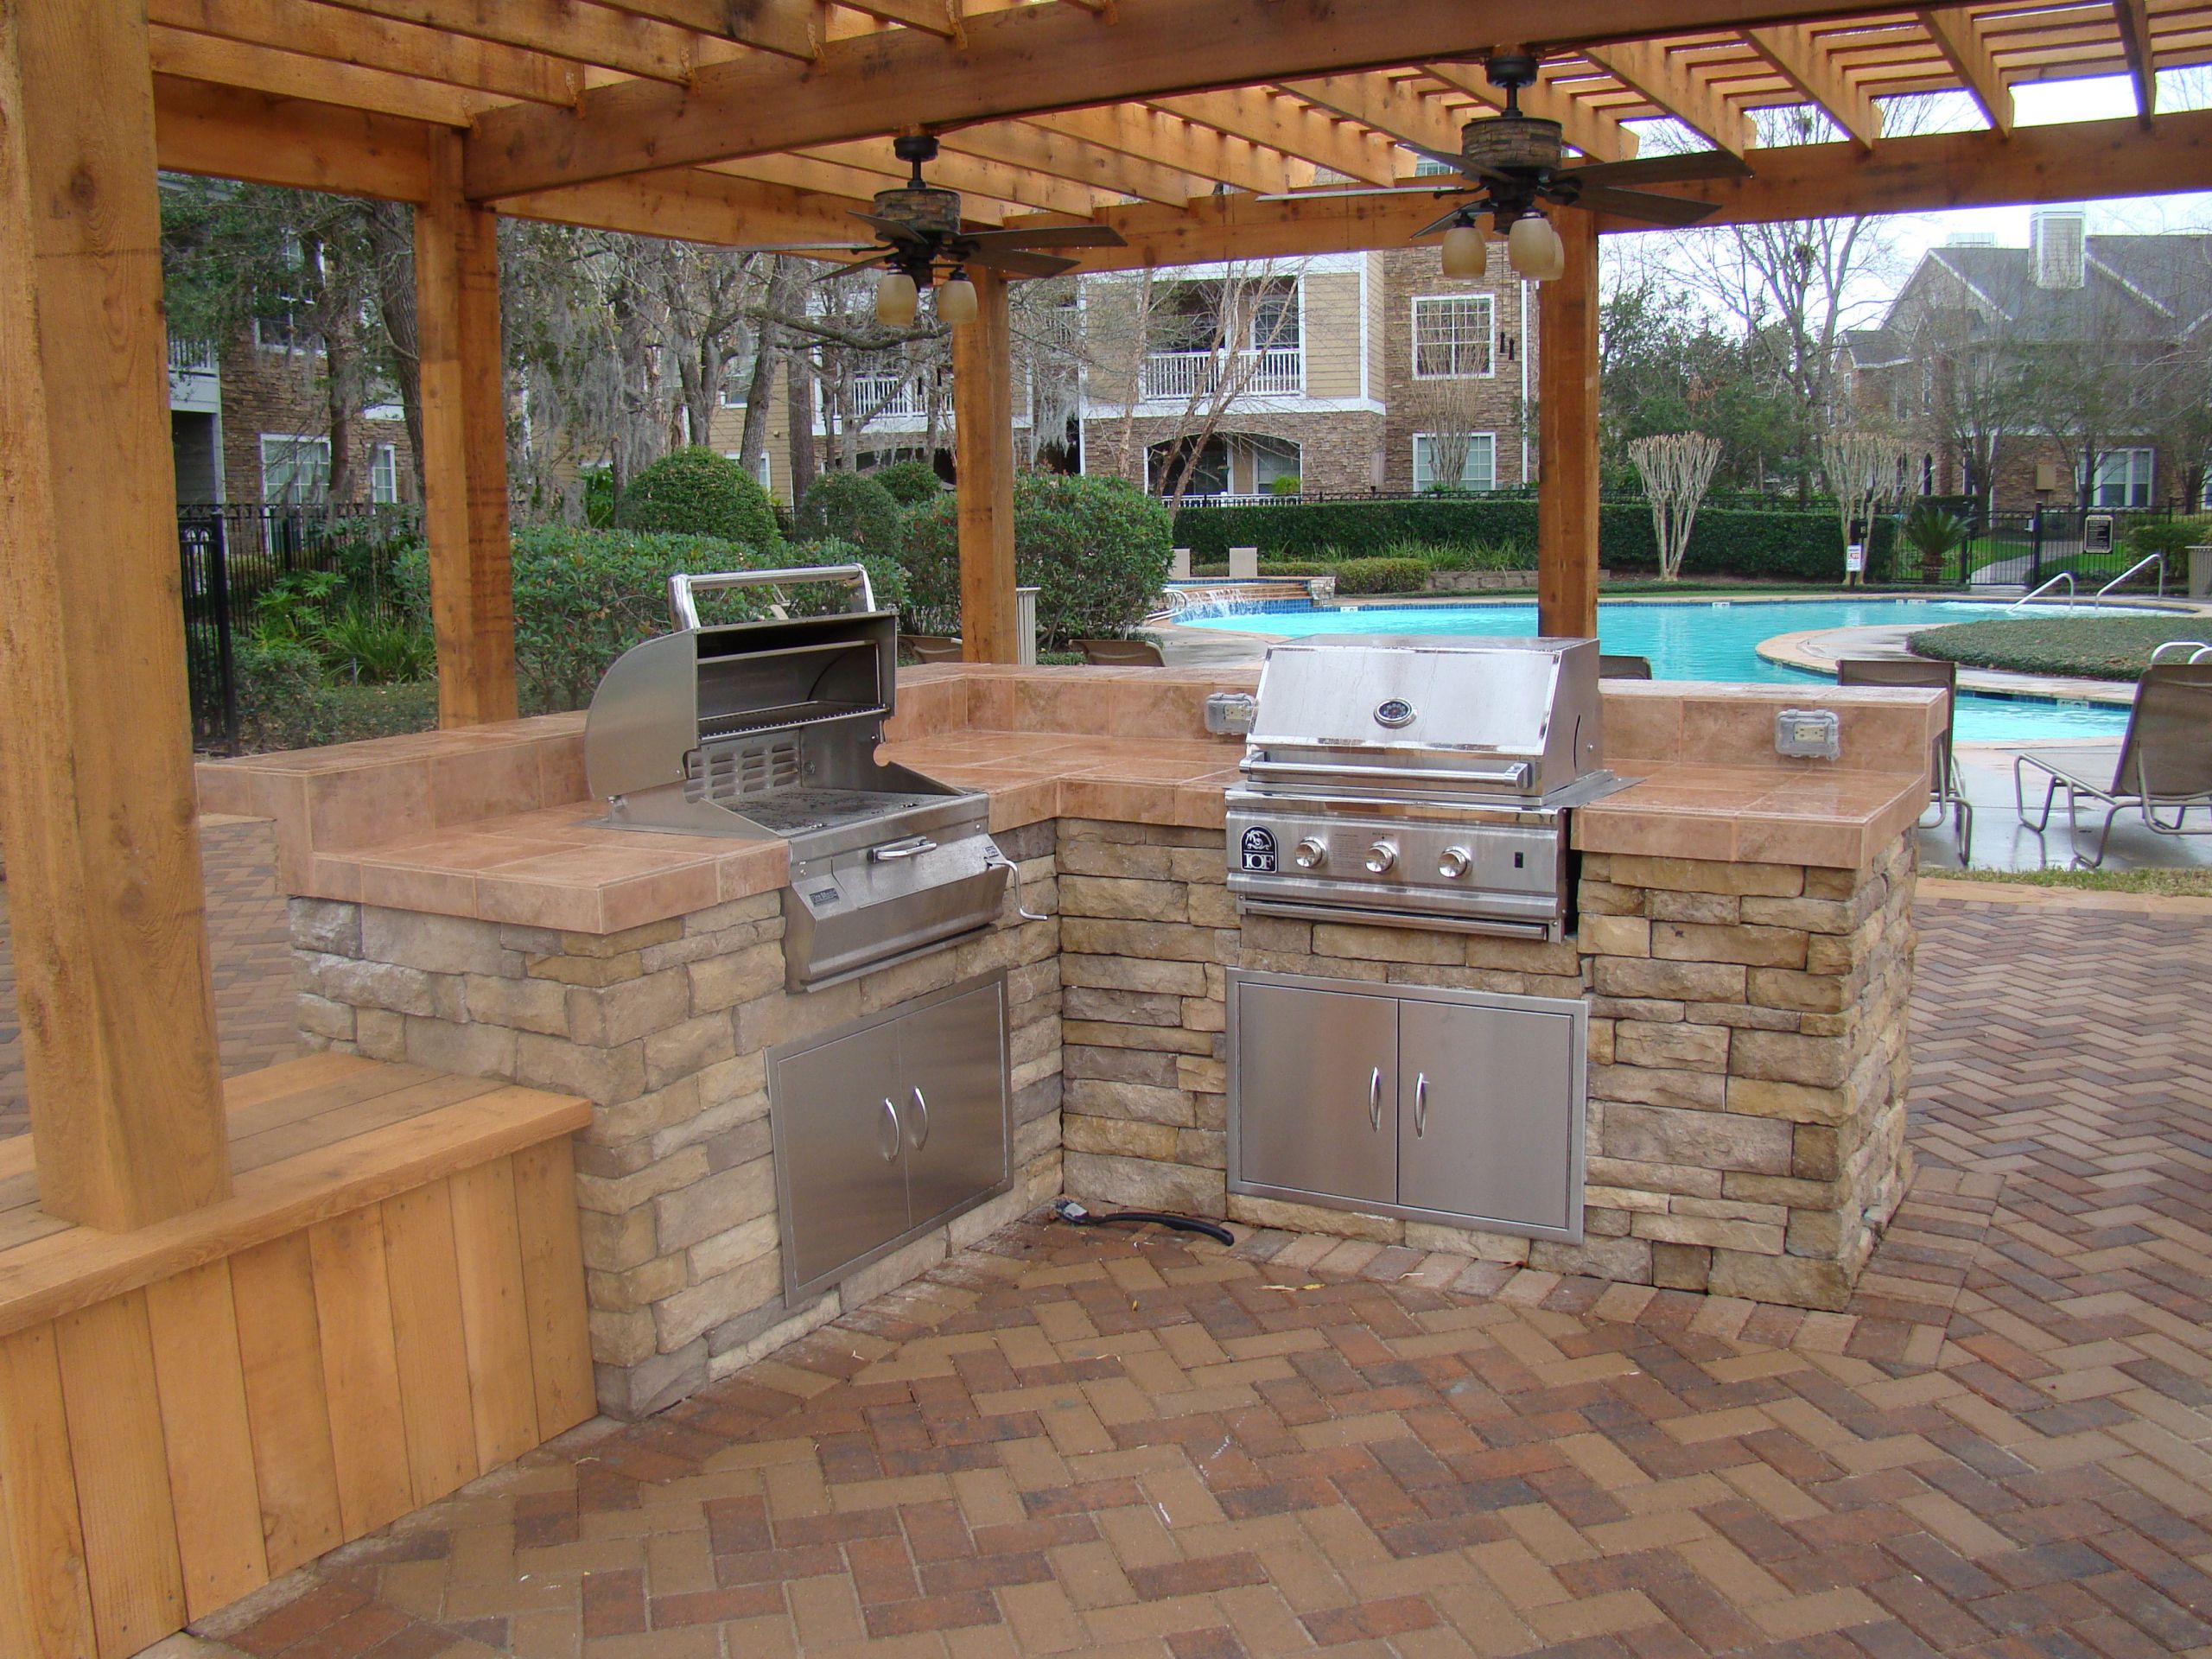 Grill For Outdoor Kitchen
 Outdoor Kitchens and Grills Seattle Brickmaster